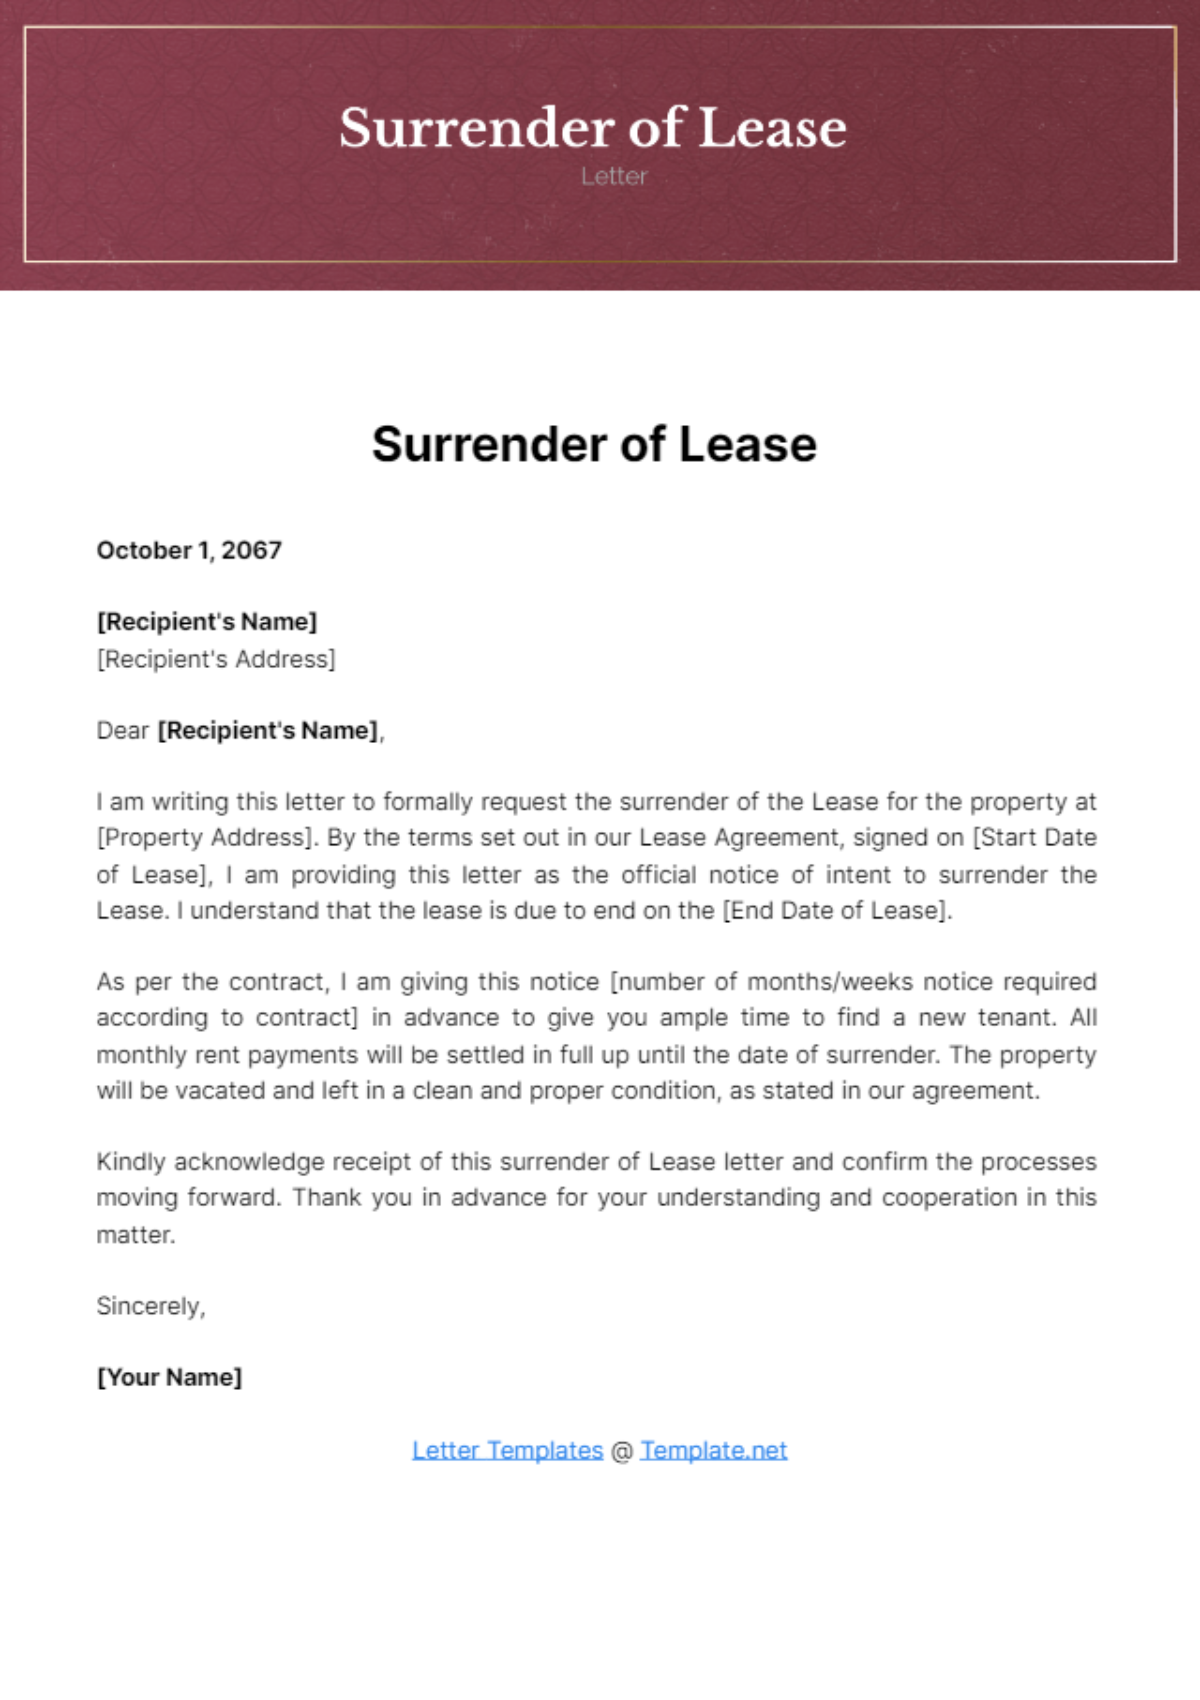 Free Surrender of Lease Letter Template